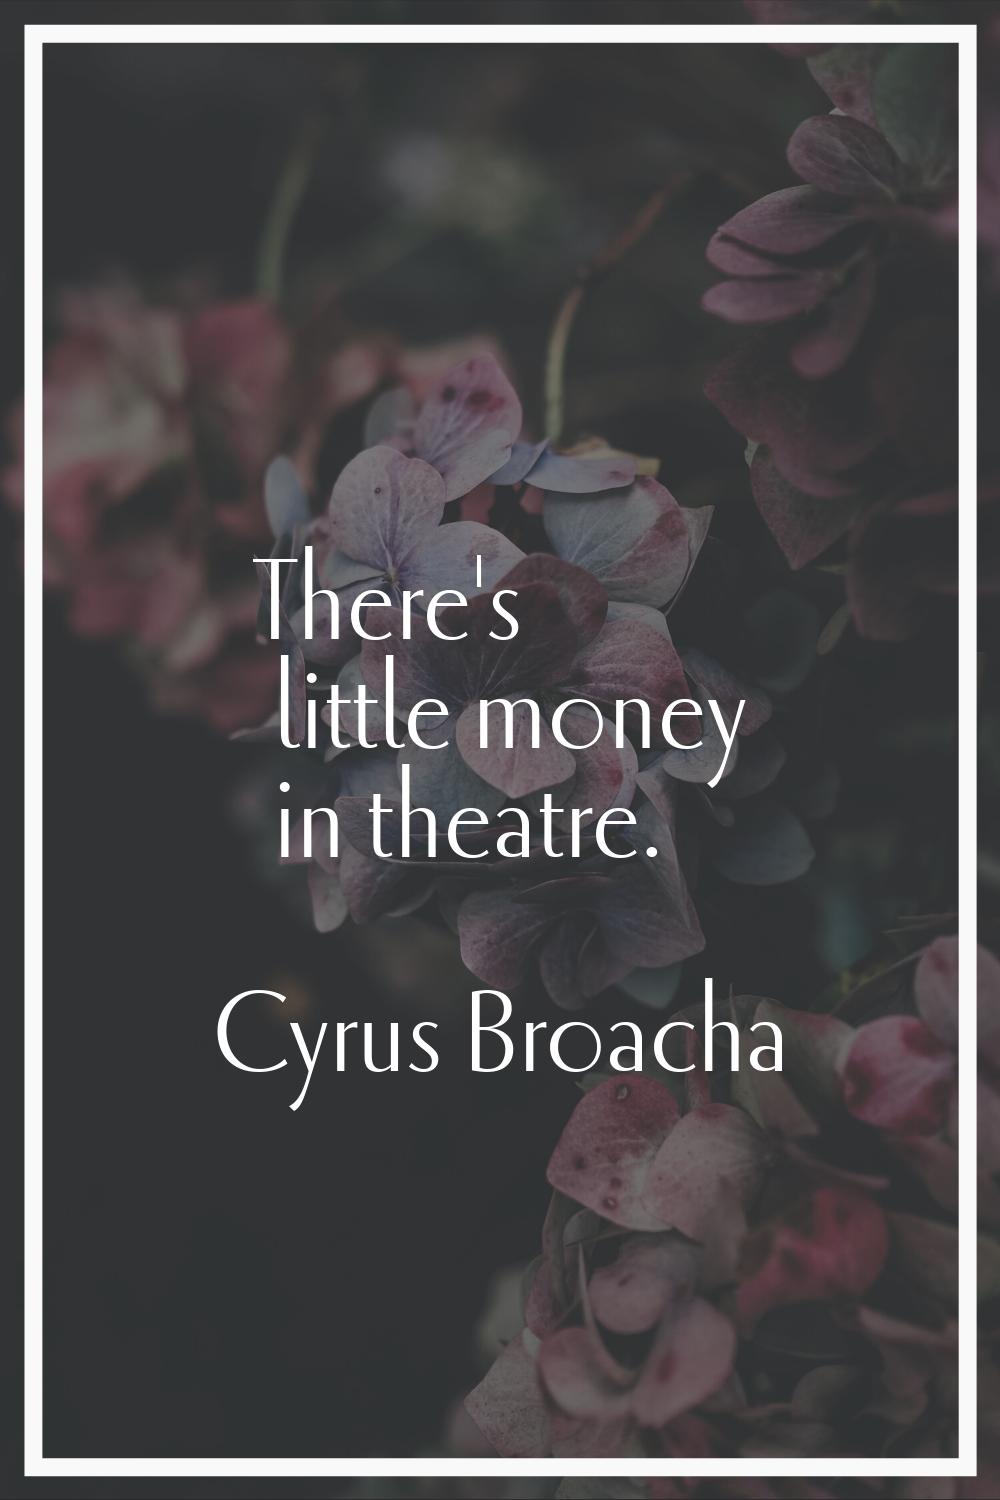 There's little money in theatre.